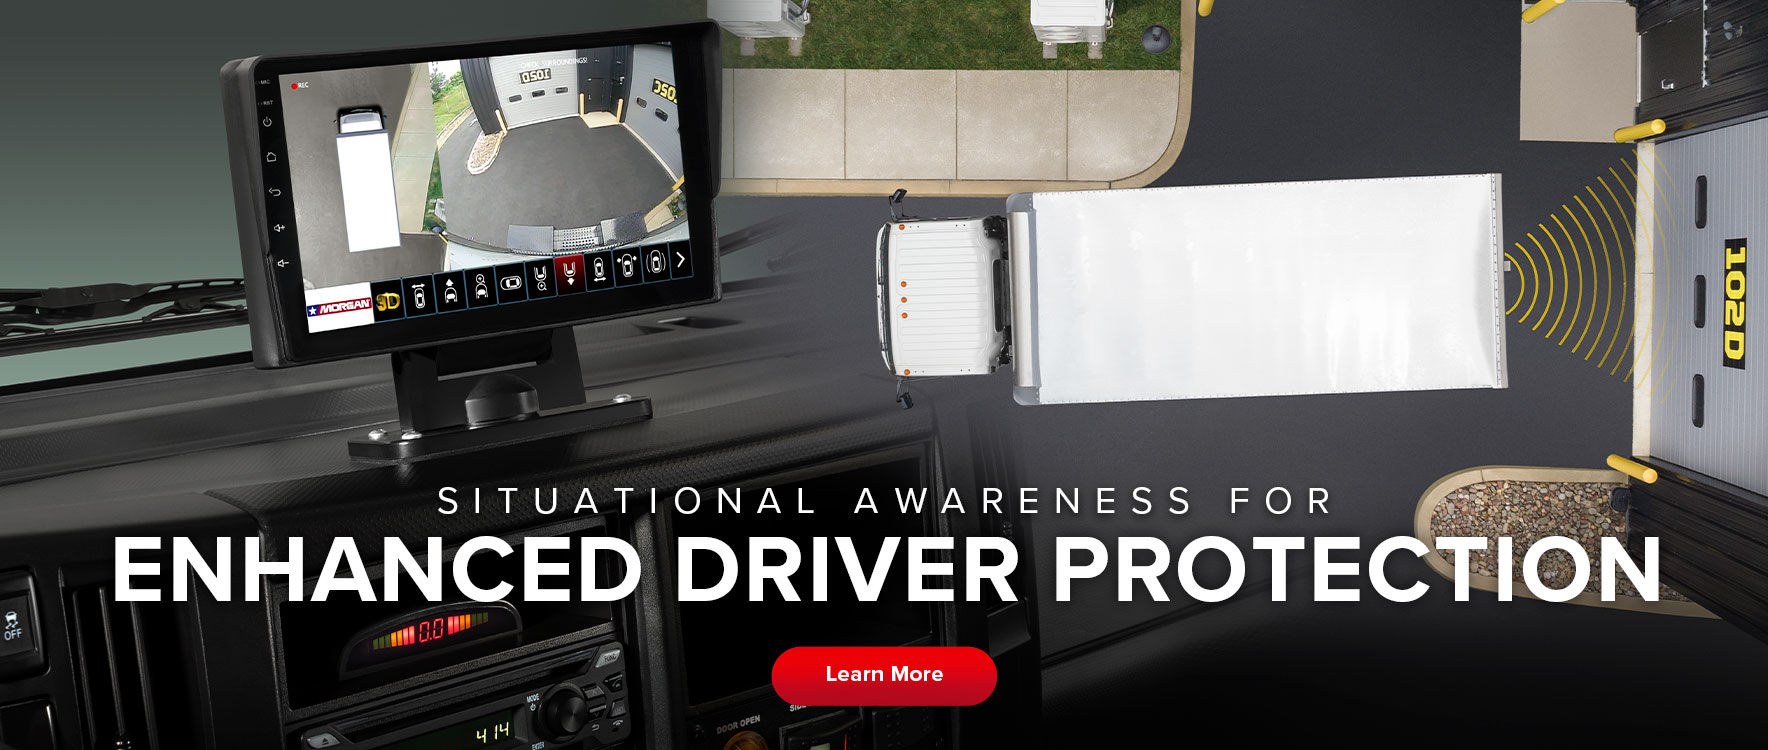 Situational Awareness Packages provide enhanced visibility inside and outside of the vehicle.